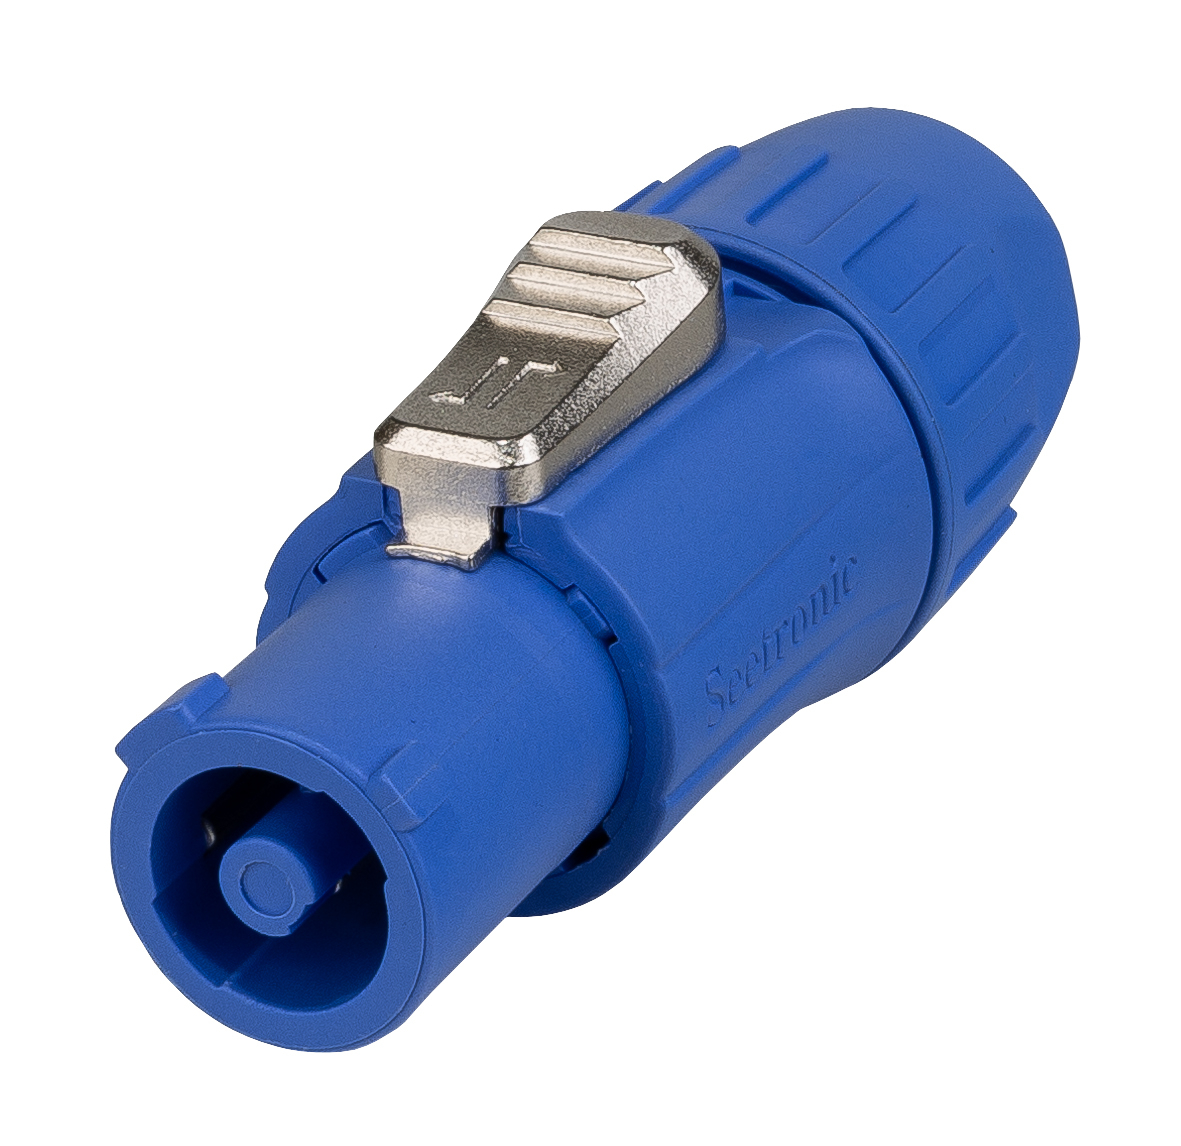 Seetronic power connector inlet (blue)